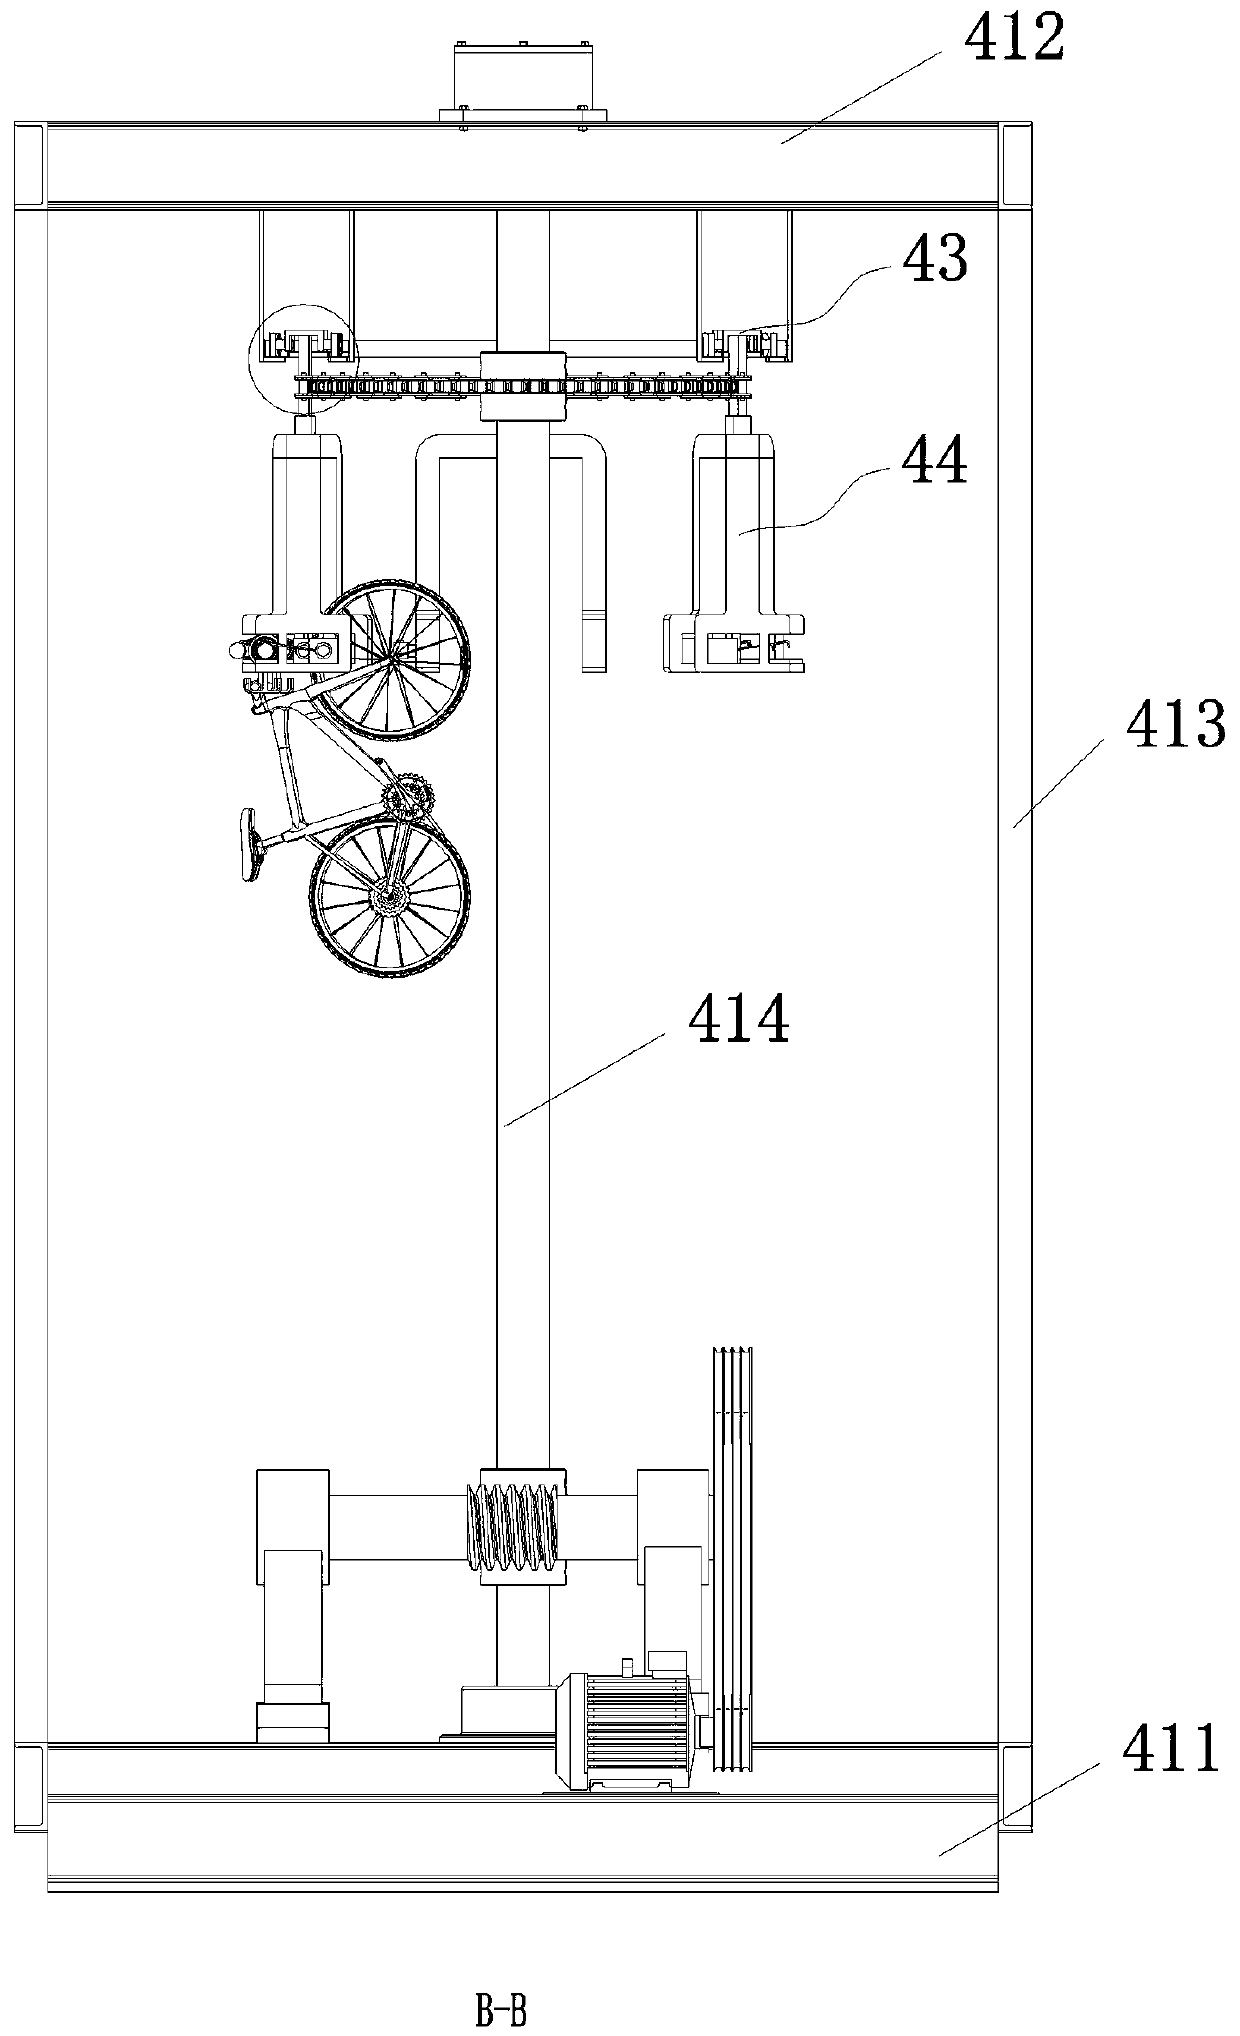 In-Bay Cycle Storage for Bicycle Storage